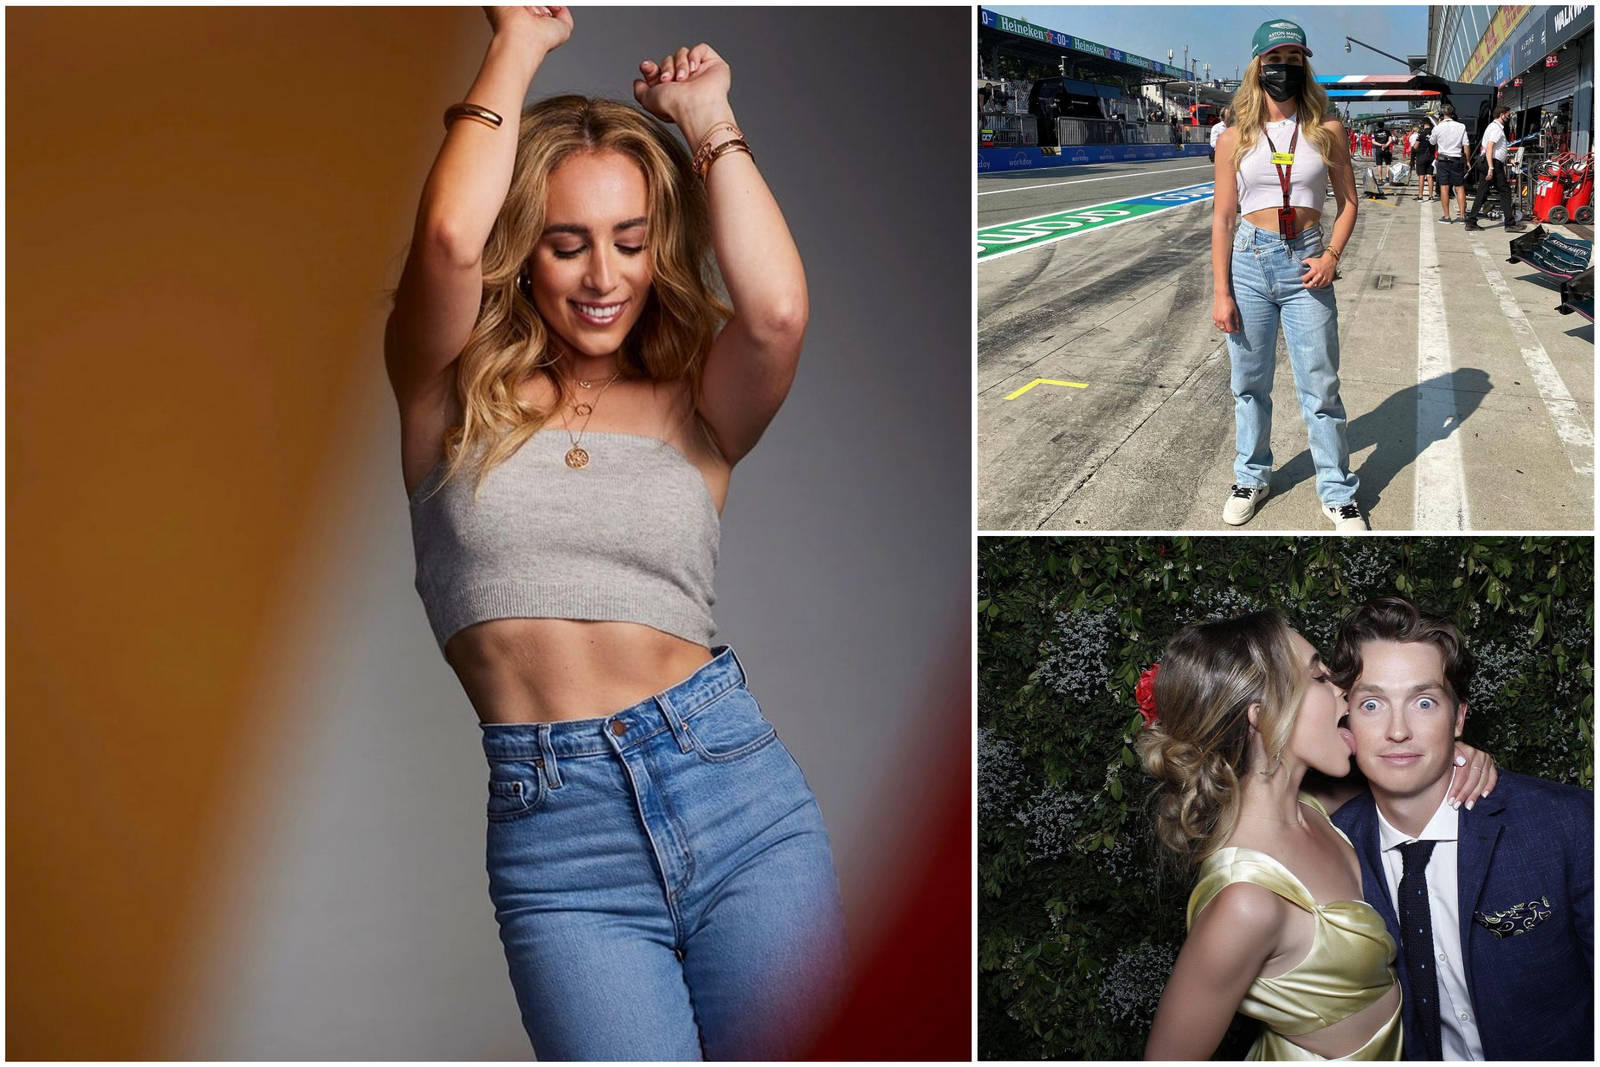 Meet Chloe Stroll, daughter of Canadian billionaire Lawrence Stroll who owns the Aston Martin F1 Team. Engaged to an Olympian snowboarder, she lives life queen-size, travels in private jets, and sails in a $200 million superyacht.